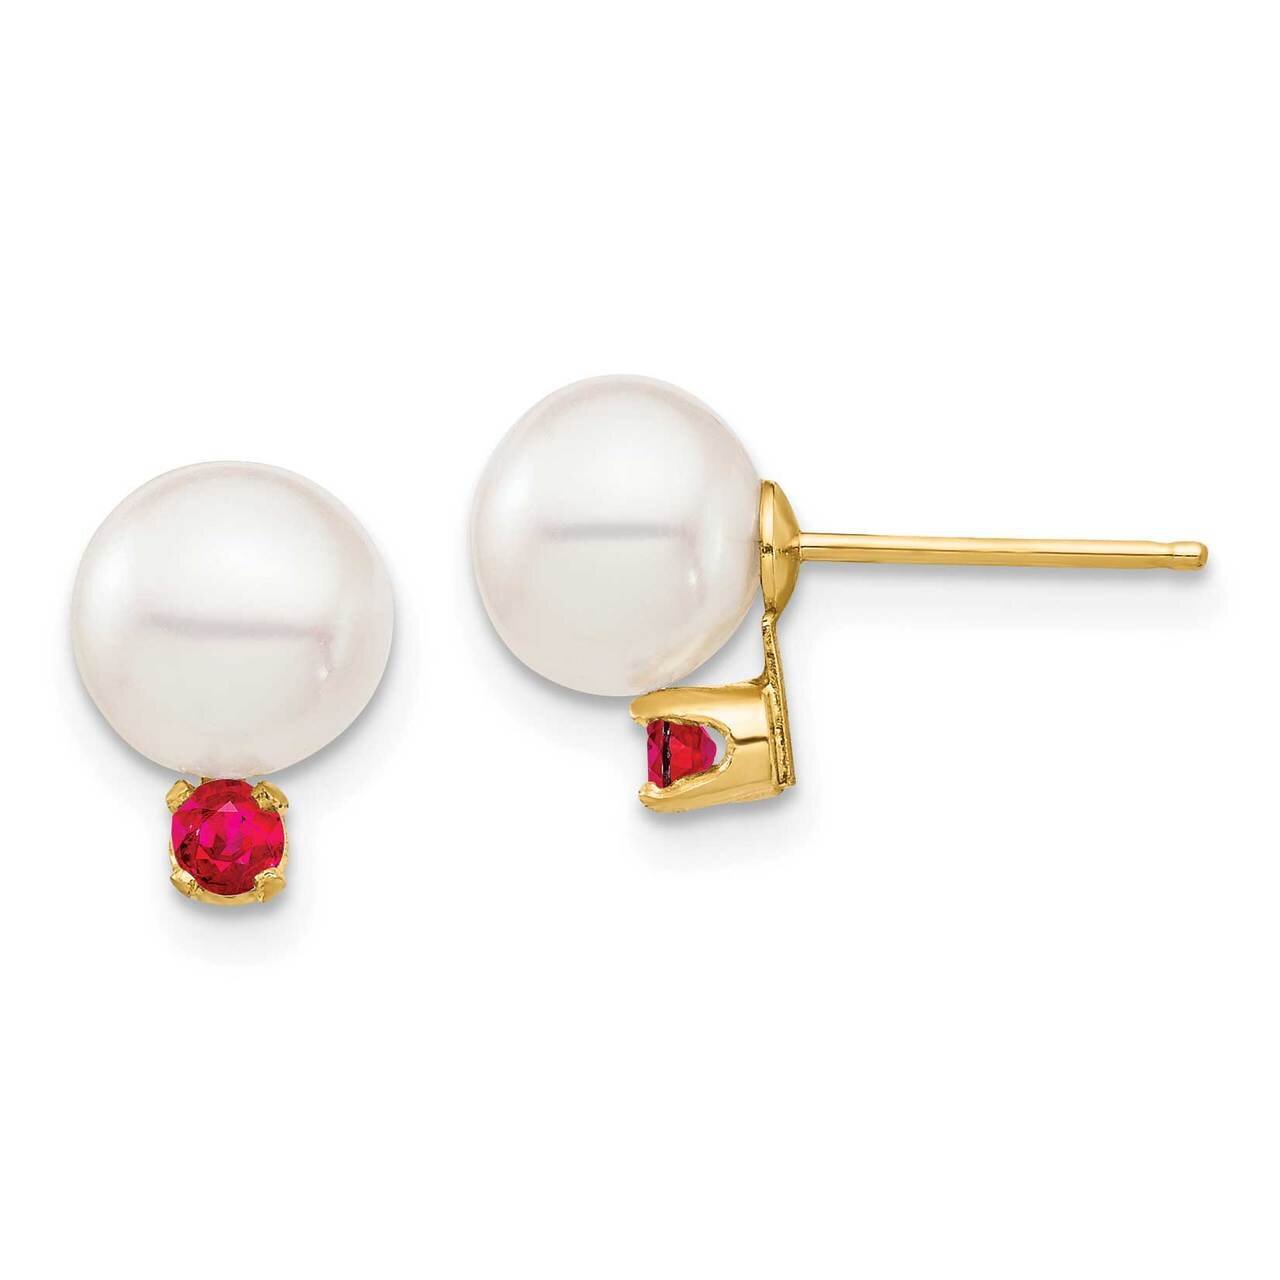 7-7.5mm White Round Freshwater Cultured Pearl Ruby Post Earrings 14k Gold XF753E_R